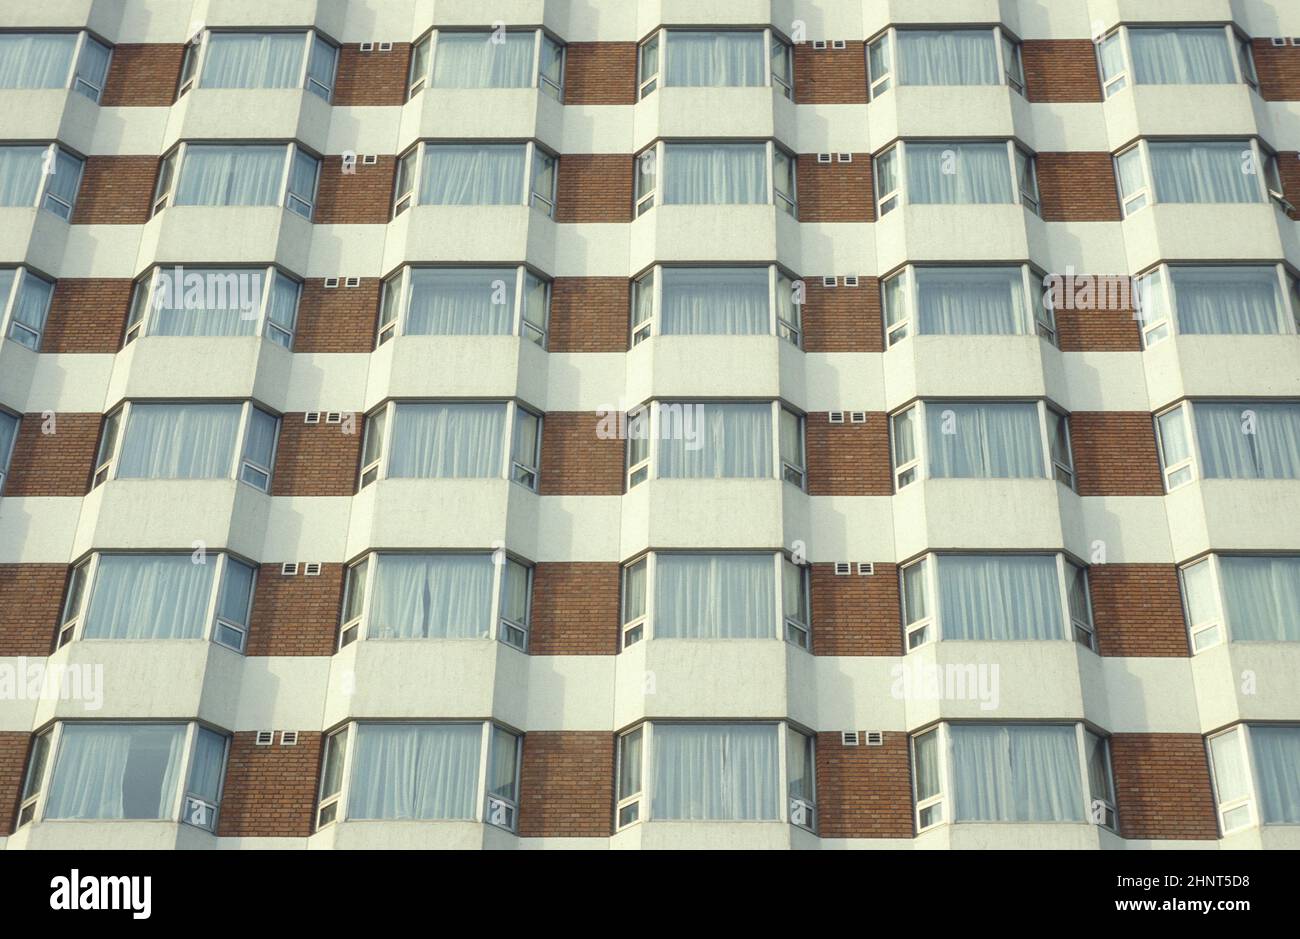 CHINA BEIJING RESIDENTIAL HOUSE Stock Photo